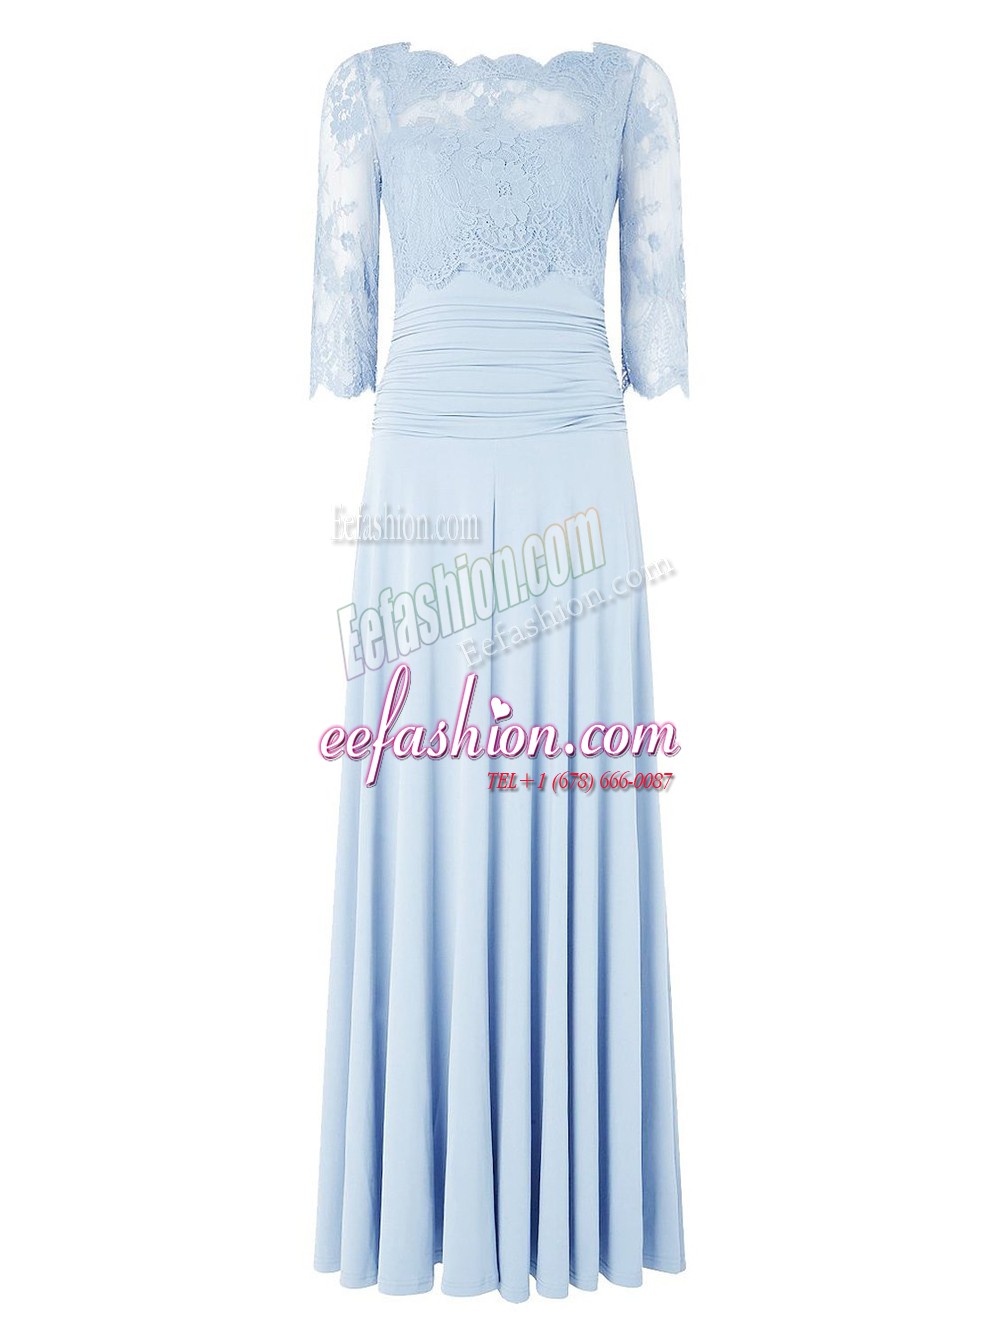  Silk Like Satin 3 4 Length Sleeve Floor Length Mother Of The Bride Dress and Lace